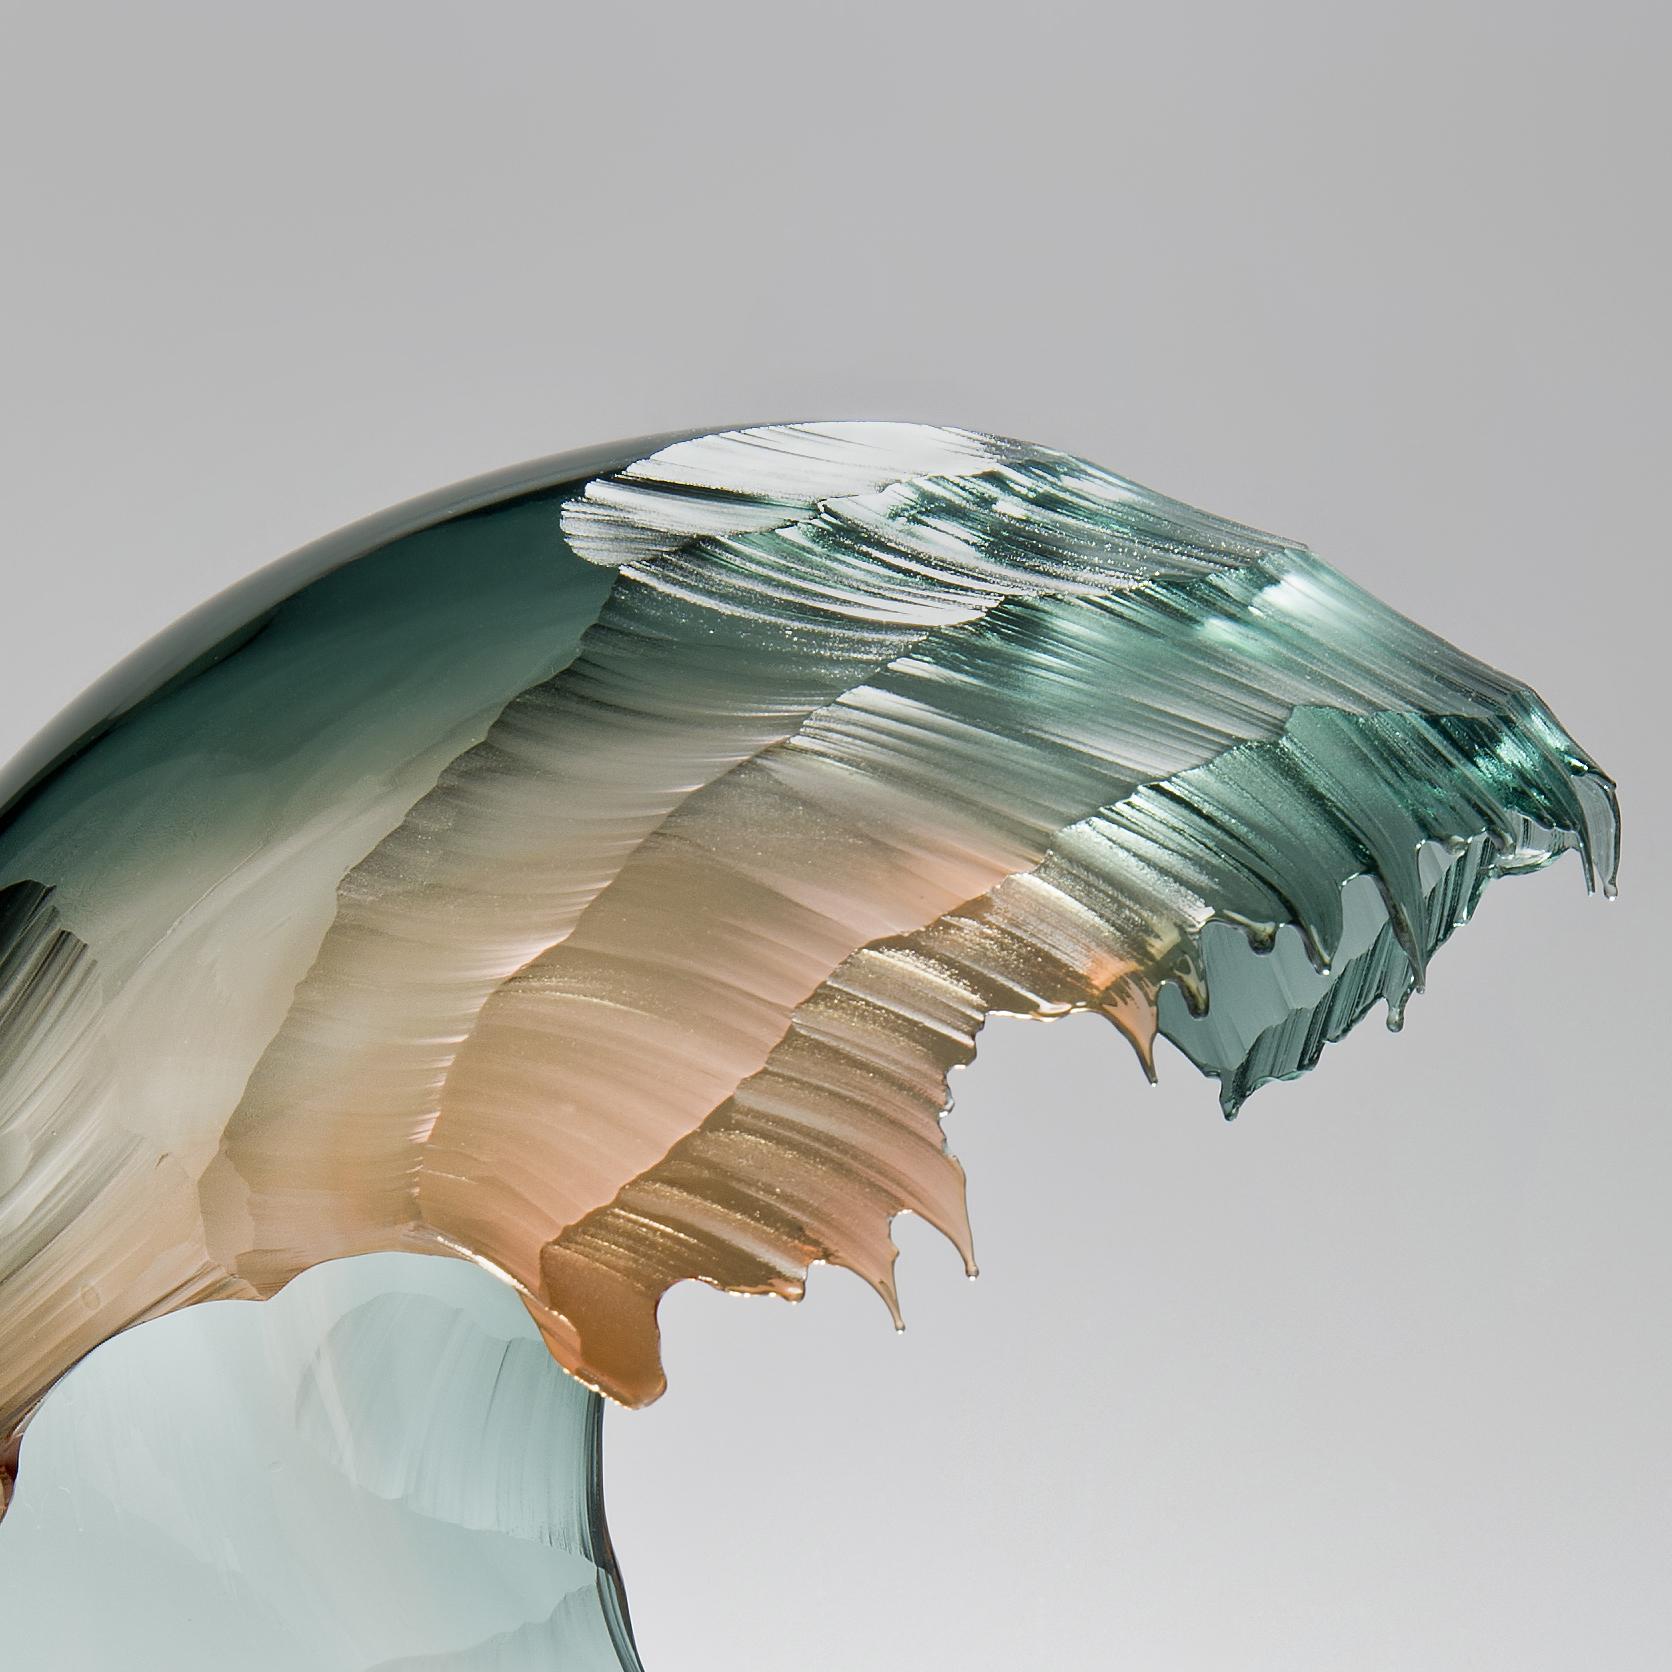 Hand-Crafted North Sea Morning Wave Form, a Teal & Apricot Glass Sculpture by Graham Muir